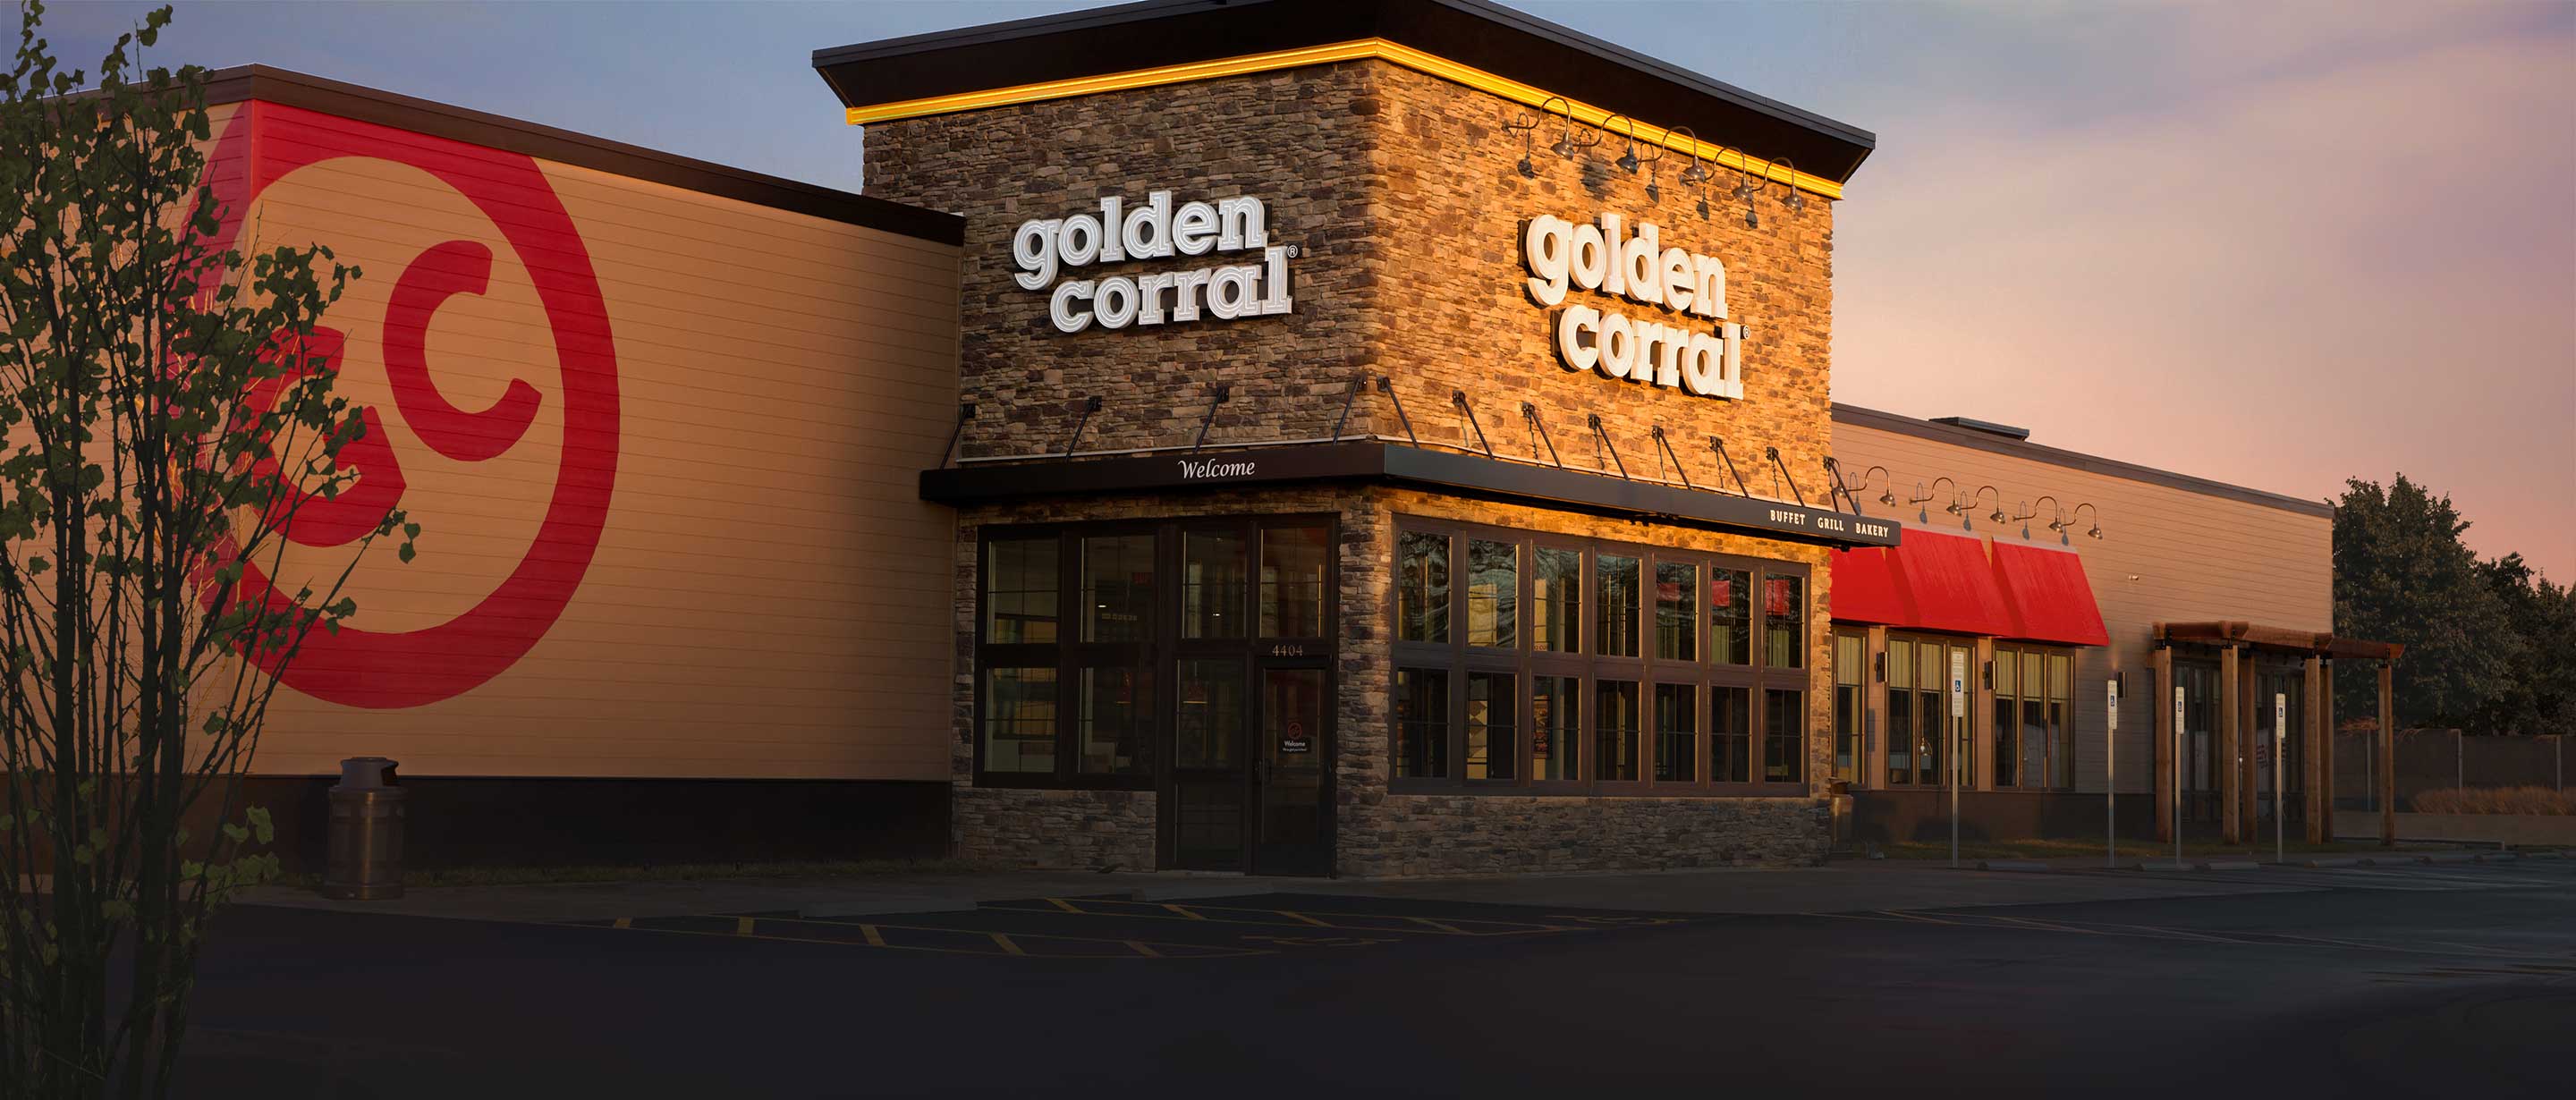 Frequently Asked Questions | Golden Corral Buffet Restaurants